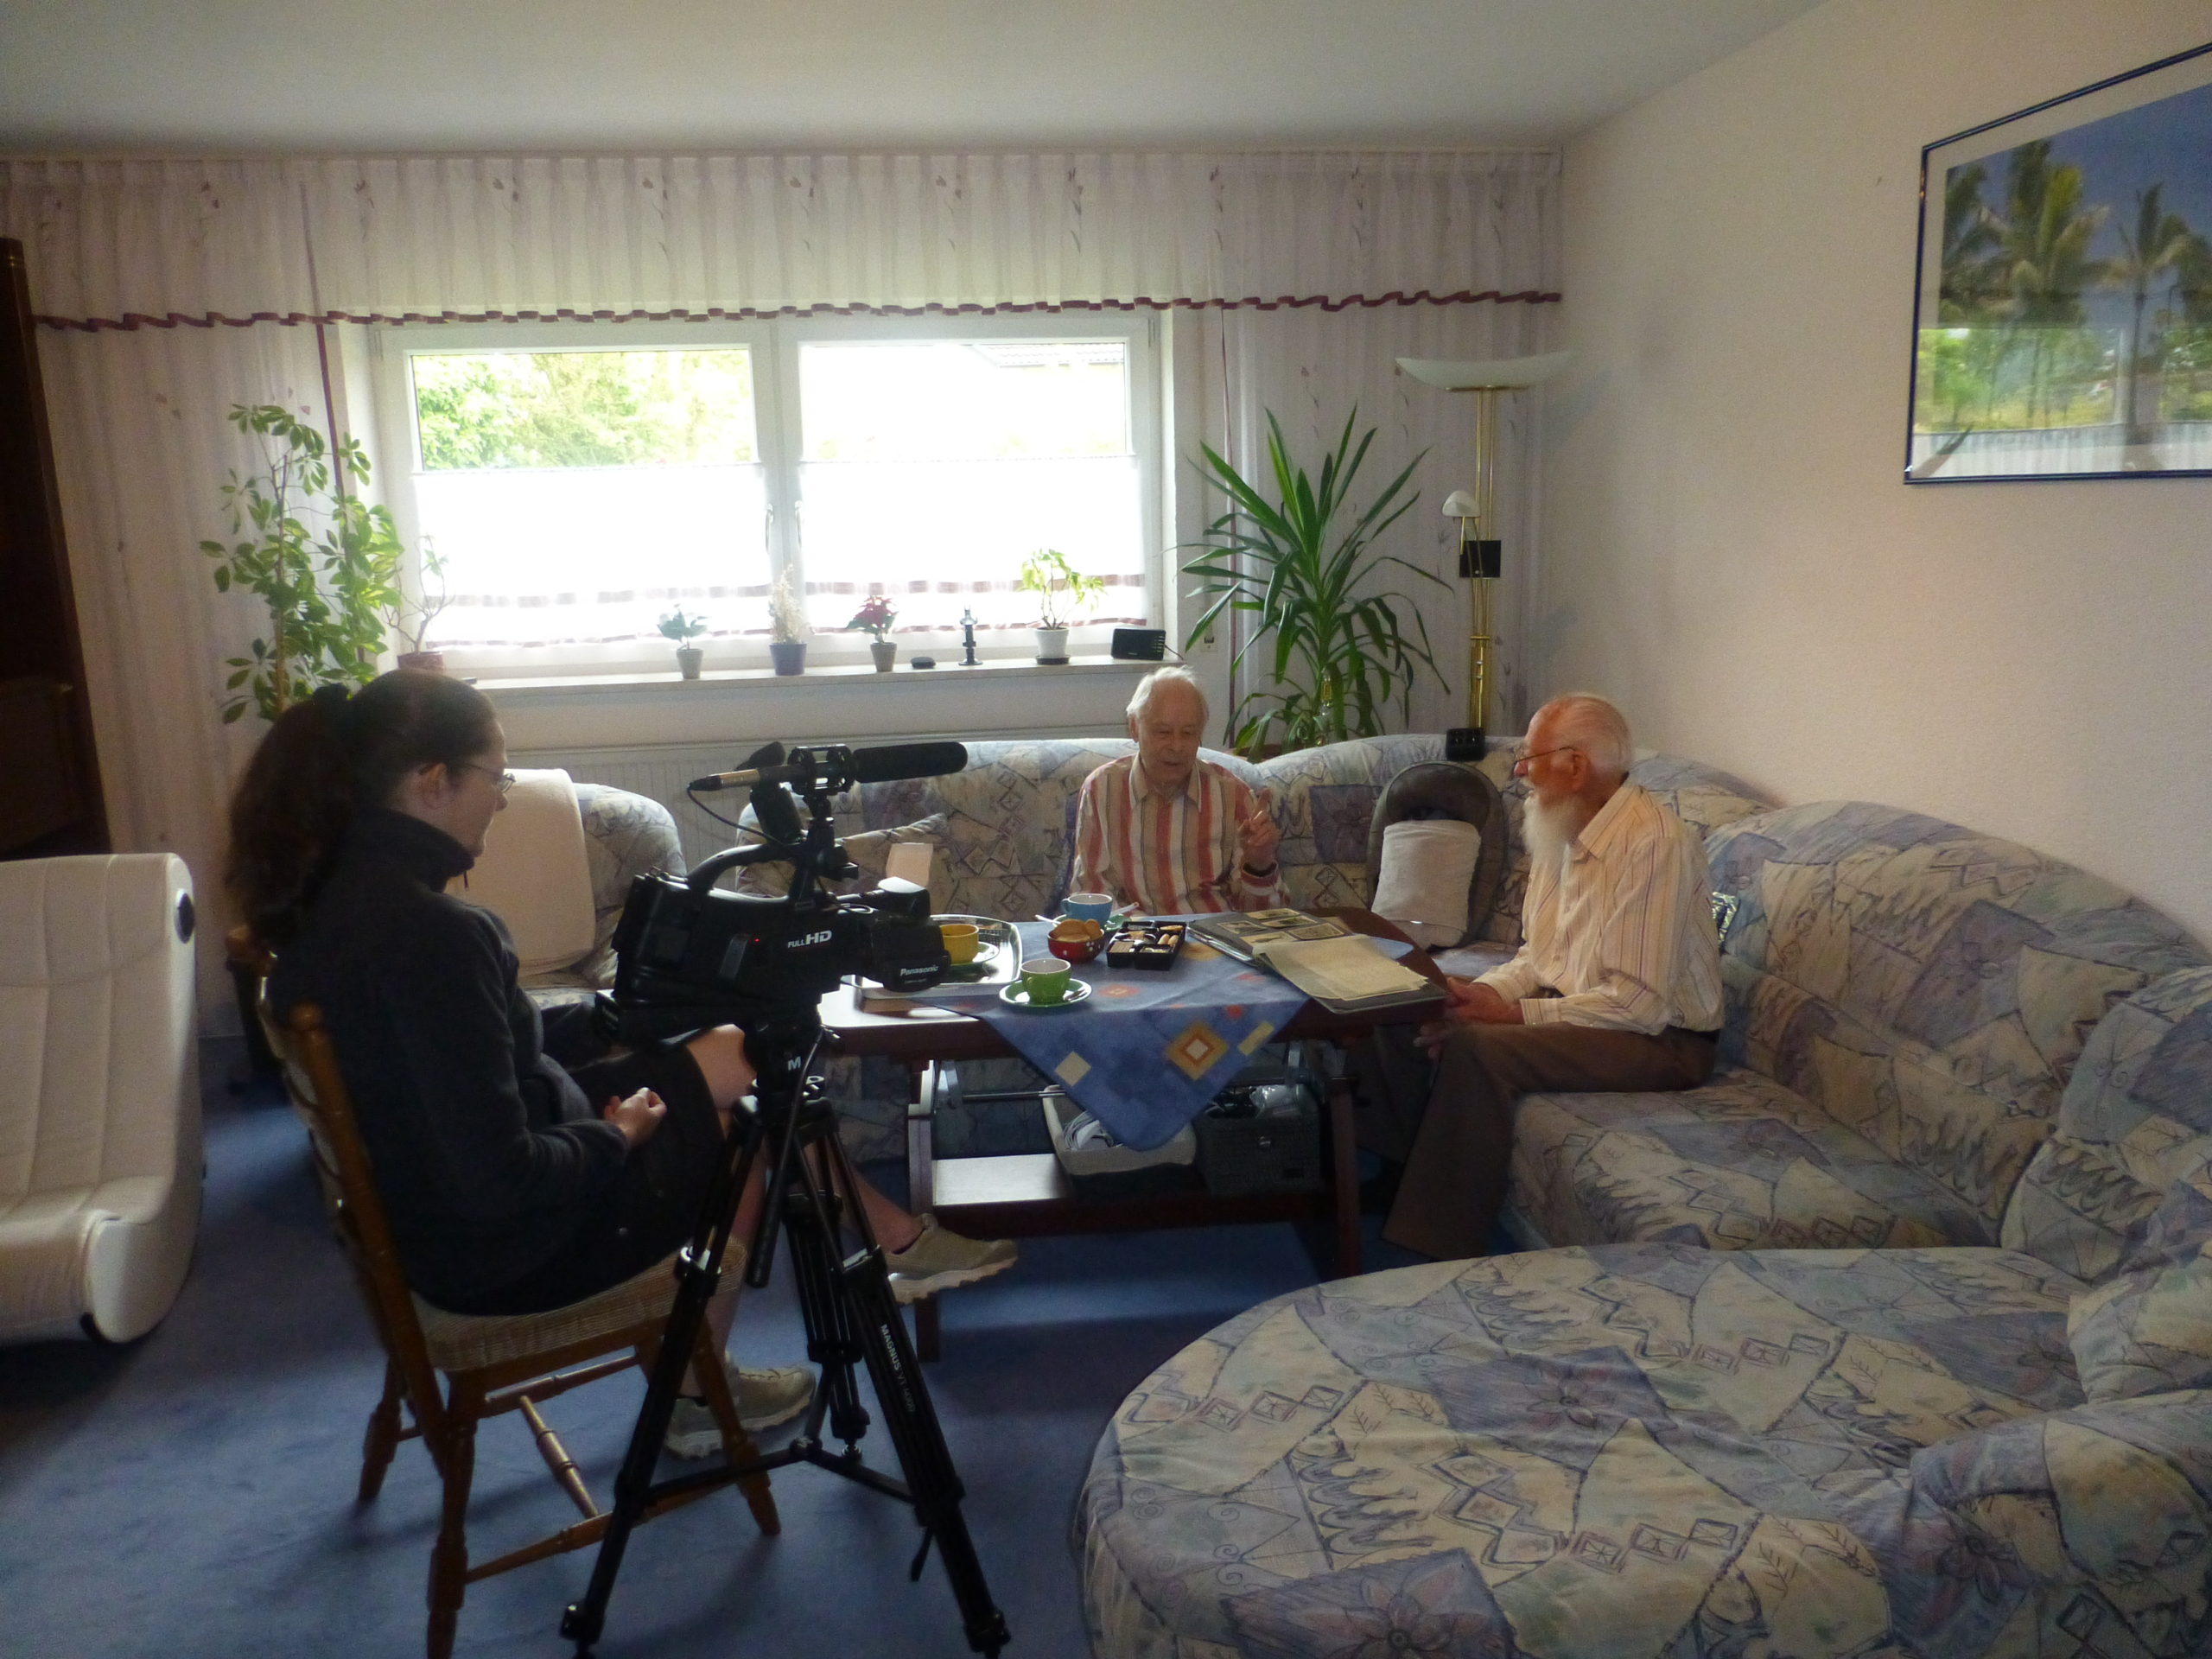 Heather Steele interviews Georg Fischl, a German paratrooper who fought in Normandy in June 1944